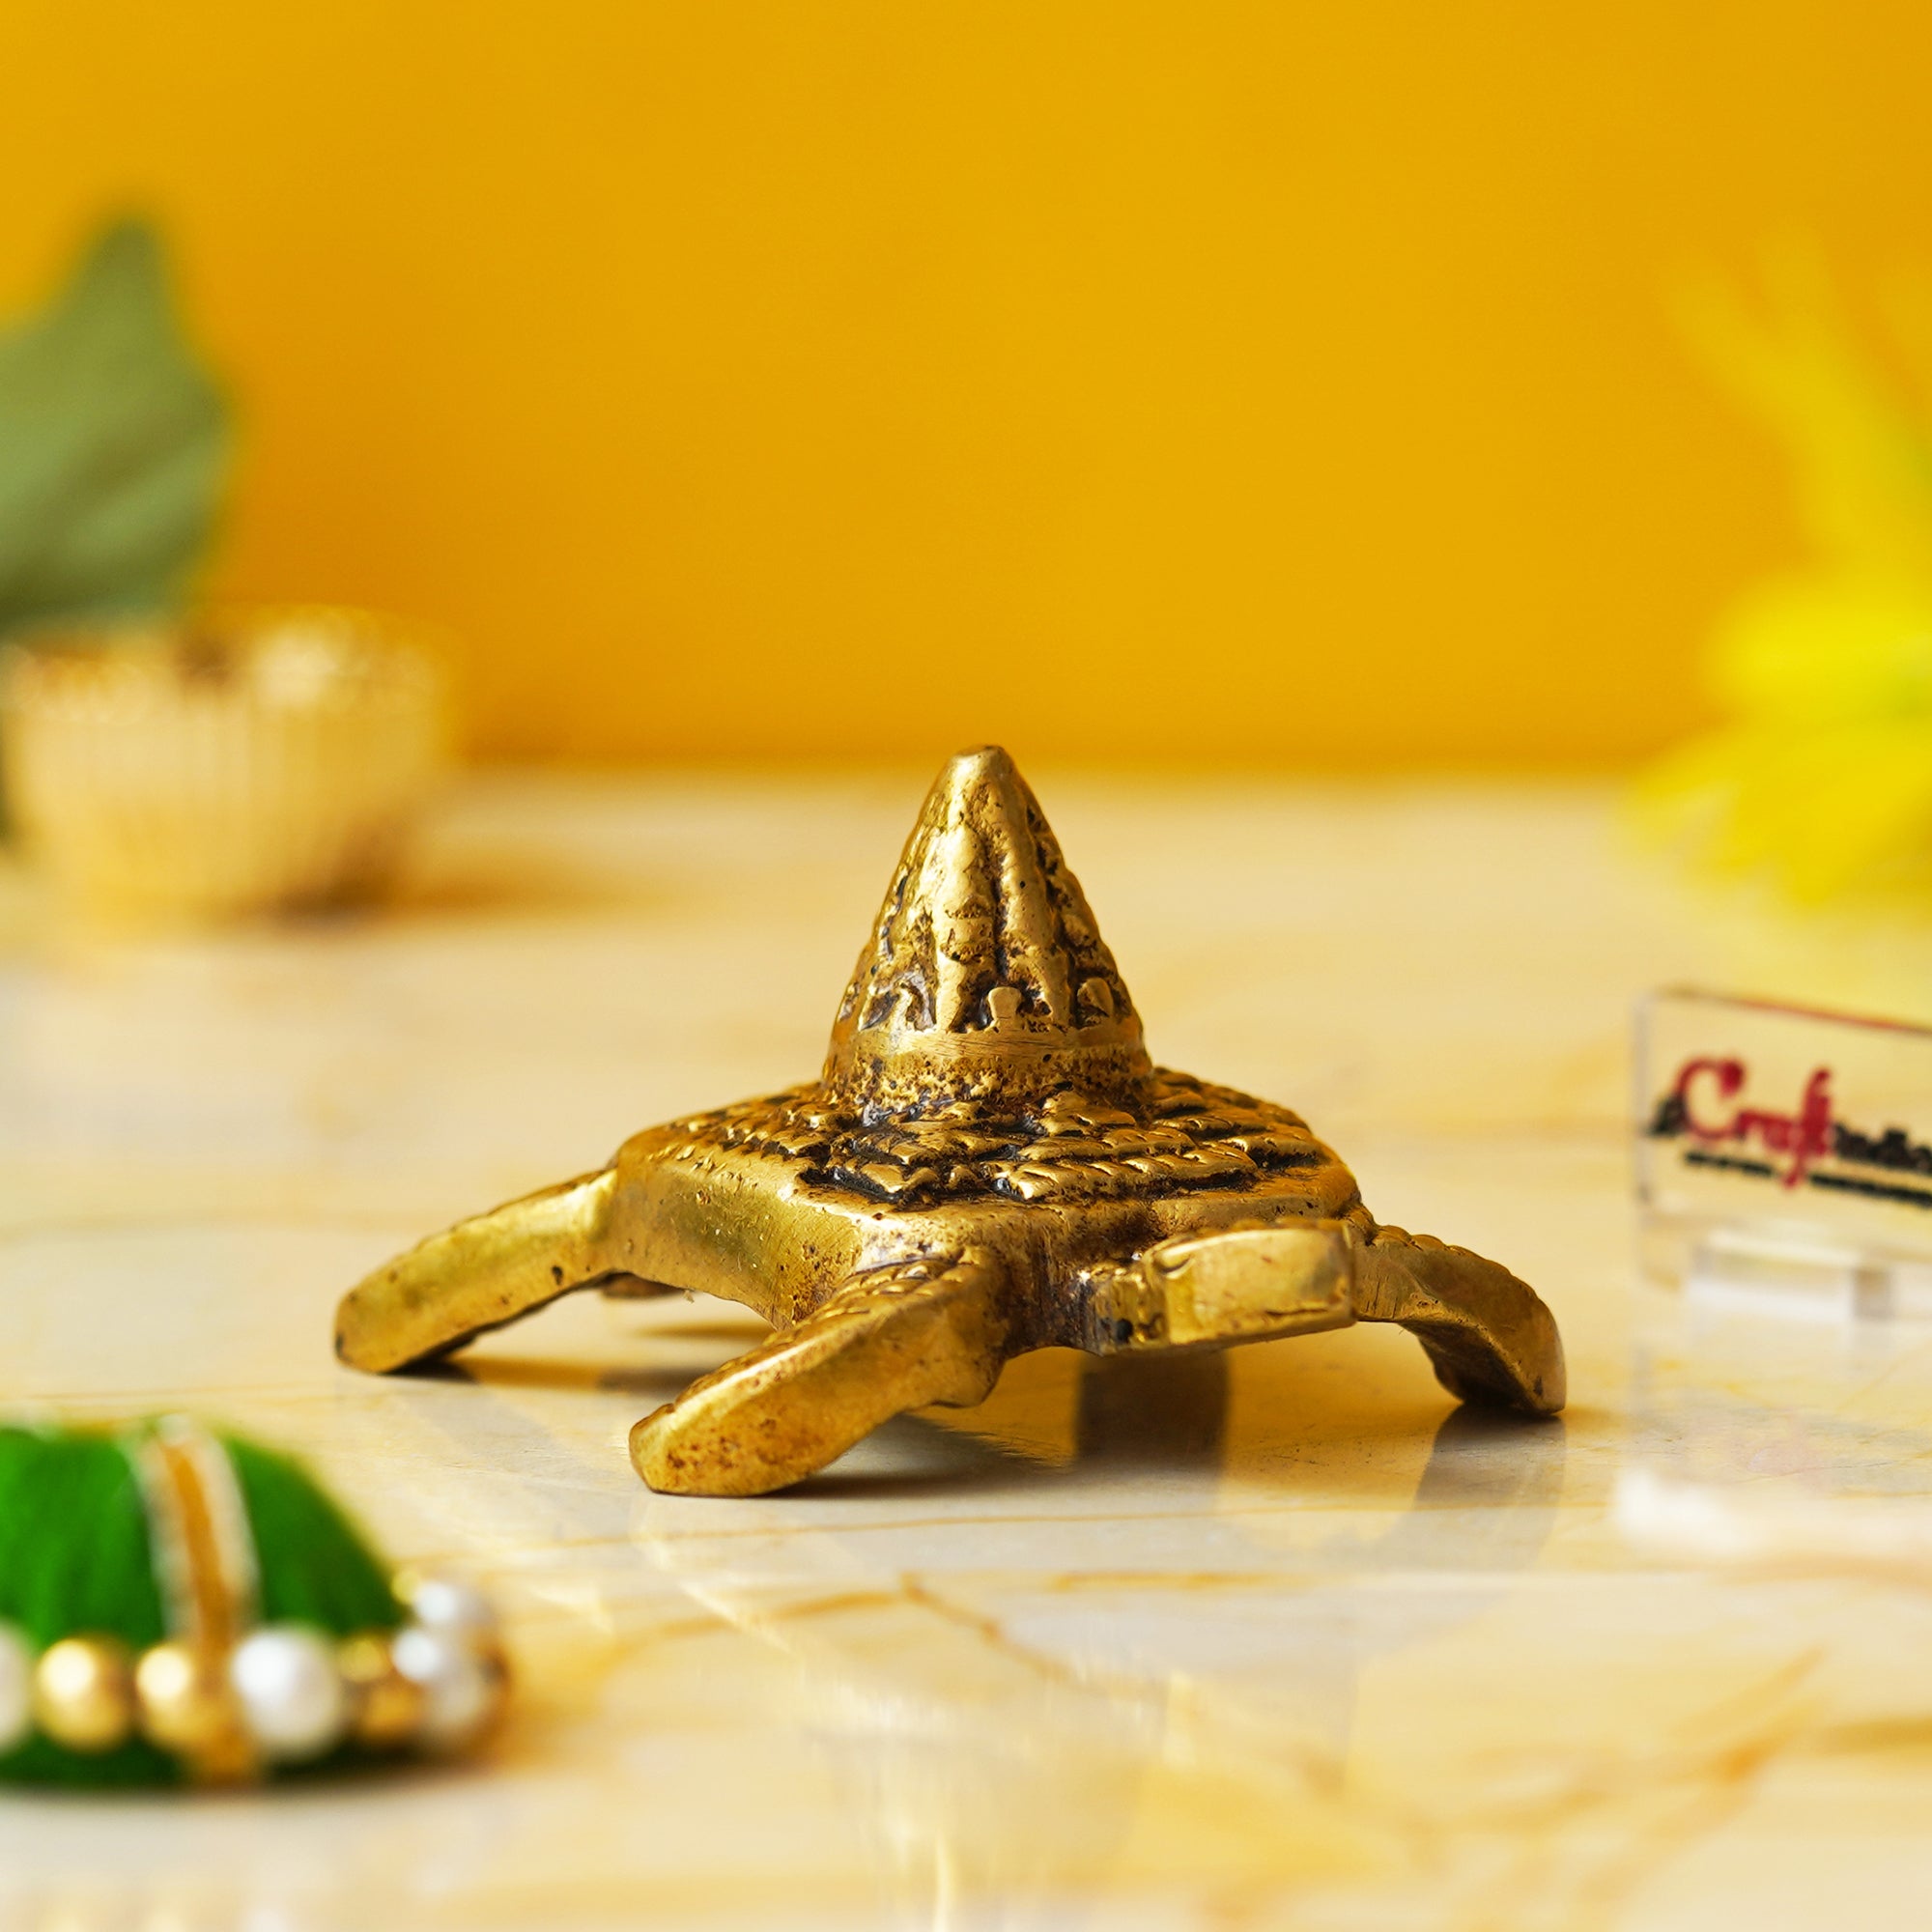 Golden Brass Meru Shree Yantra on Tortoise Statue Showpiece for Home, Office, and Temple - Bring Good Luck - Gift for Festive Occasions 6